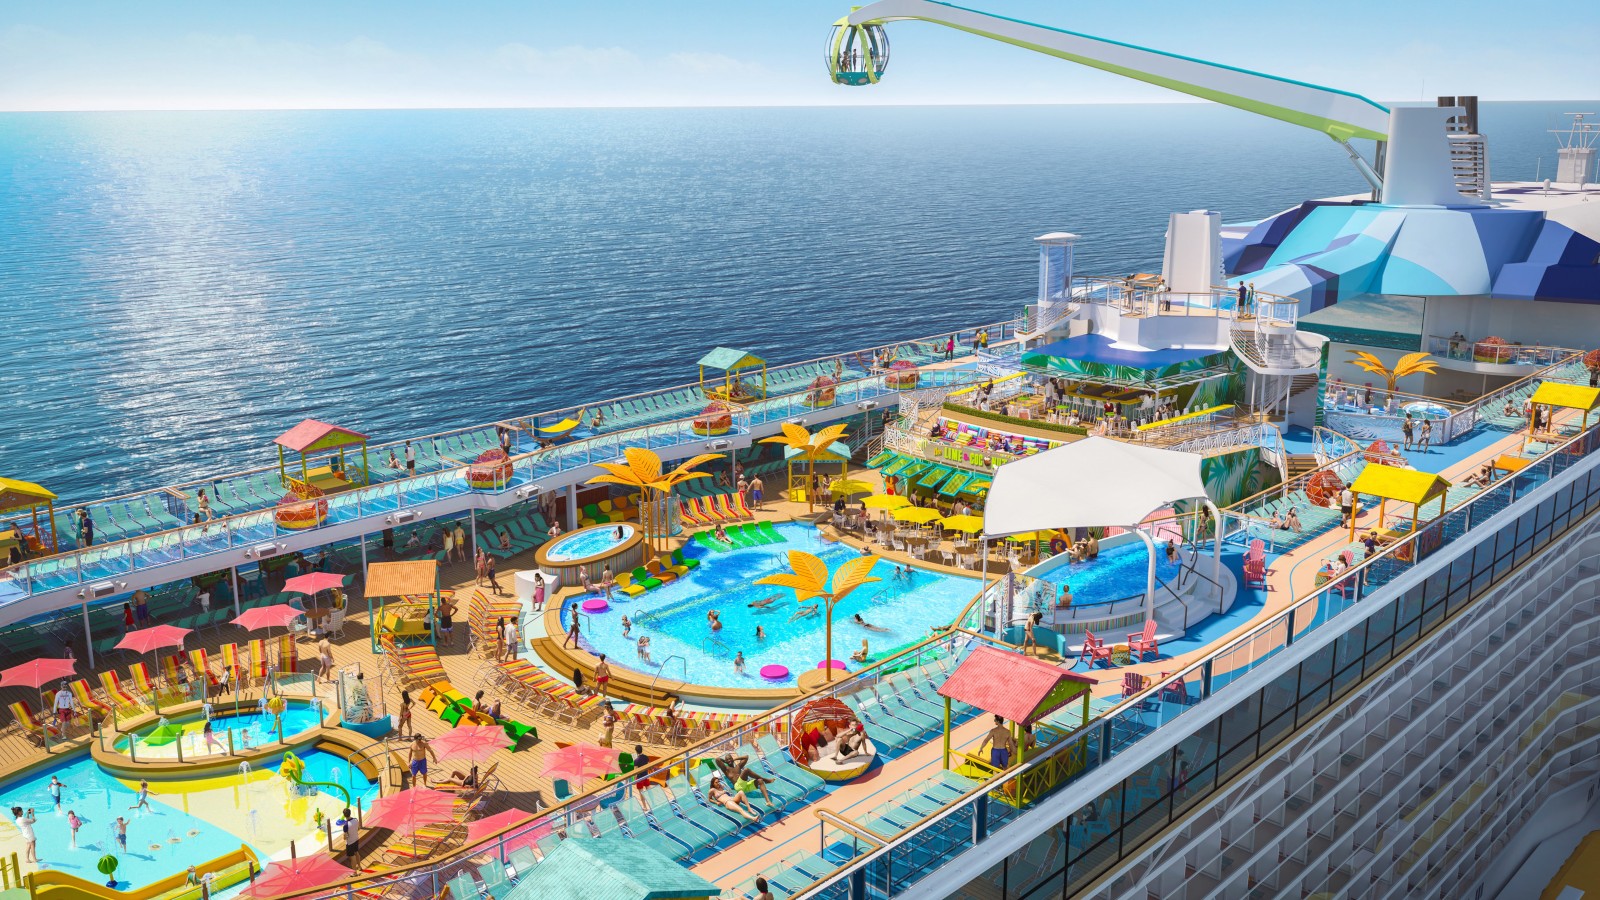 Debuting May 2021 in Haifa for her inaugural summer season, Odyssey of the Seas has two-level pool deck with two pools, a kids’ aqua park and four whirlpools surrounded by casitas and hammocks. Photo courtesy of Royal Caribbean International